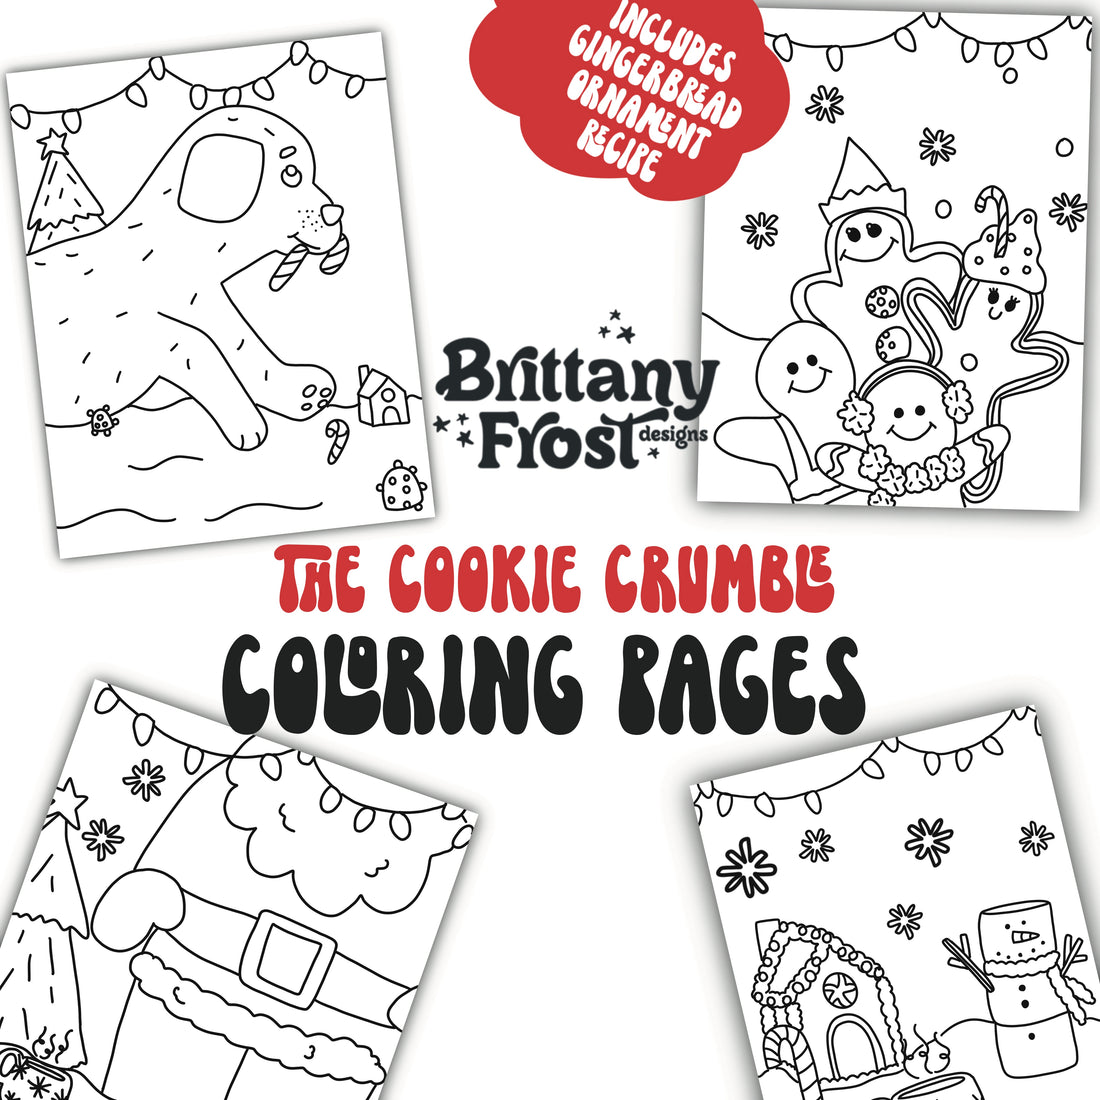 The Cookie Crumble Coloring Pages